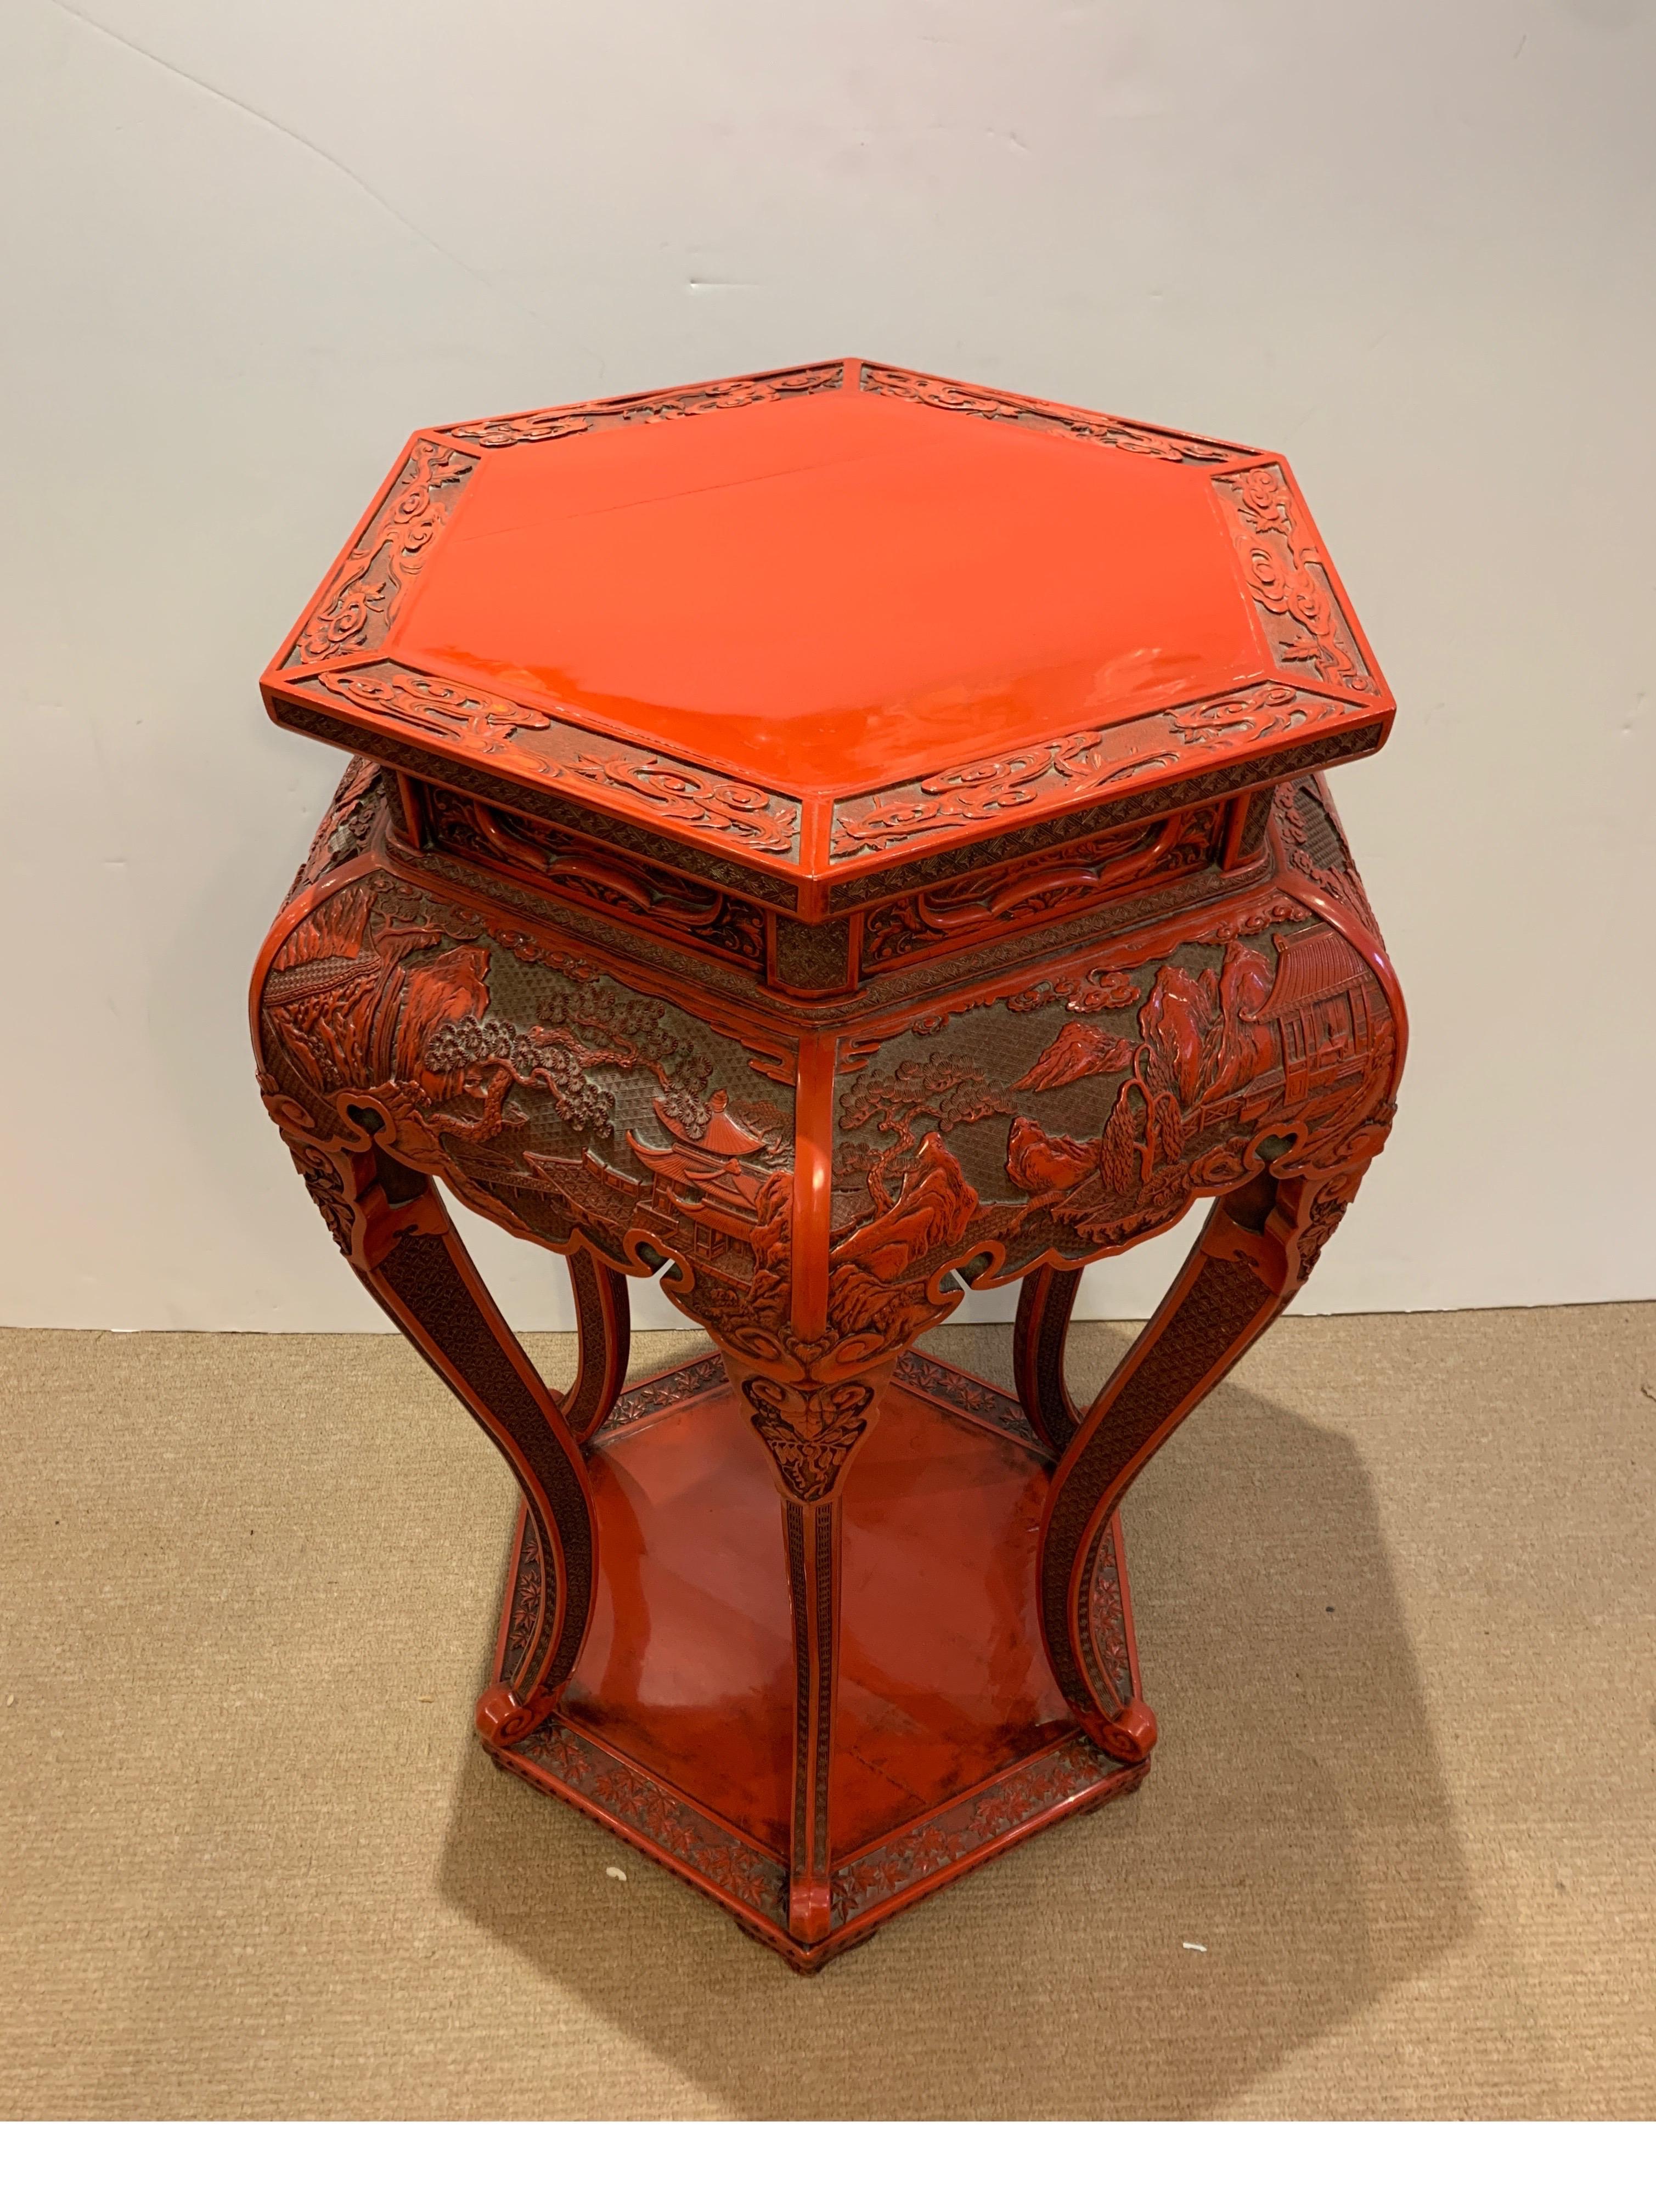 Finest quality Cinnabar lacquer hand carved large stand in the Ming style. Shapely, beautifully
constructed, 35.5 incest all, the top of the flat surface is 18.5 by 18.5, circa 1950.